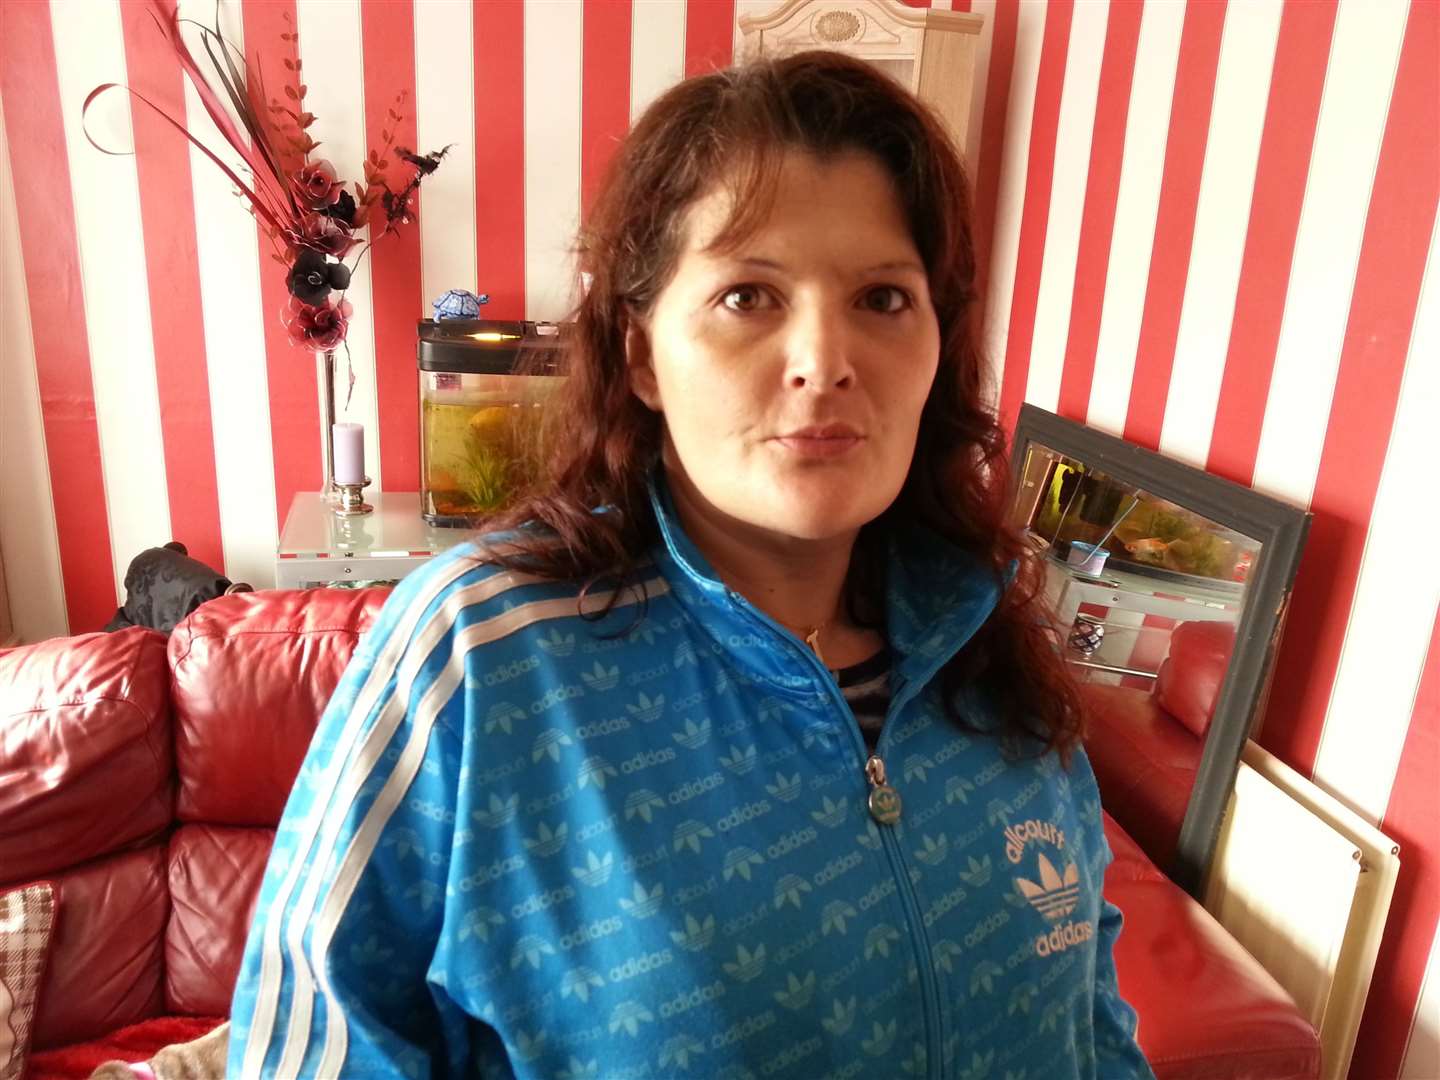 Joanne Jones pictured at her mum's Canterbury home in 2014